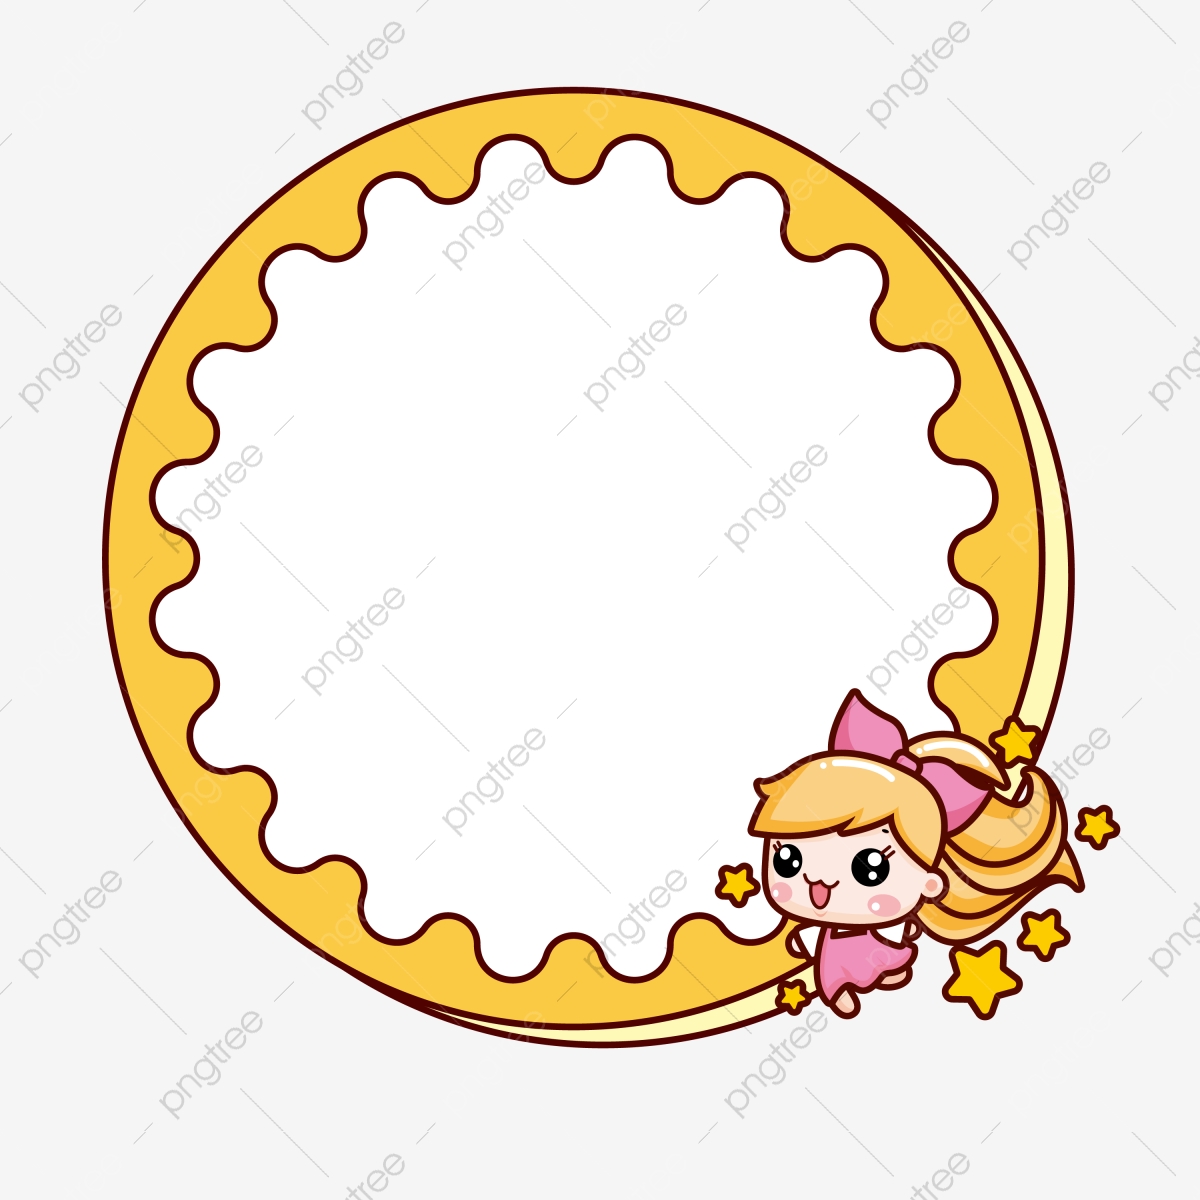 Yellow border gear frame. Gears clipart round